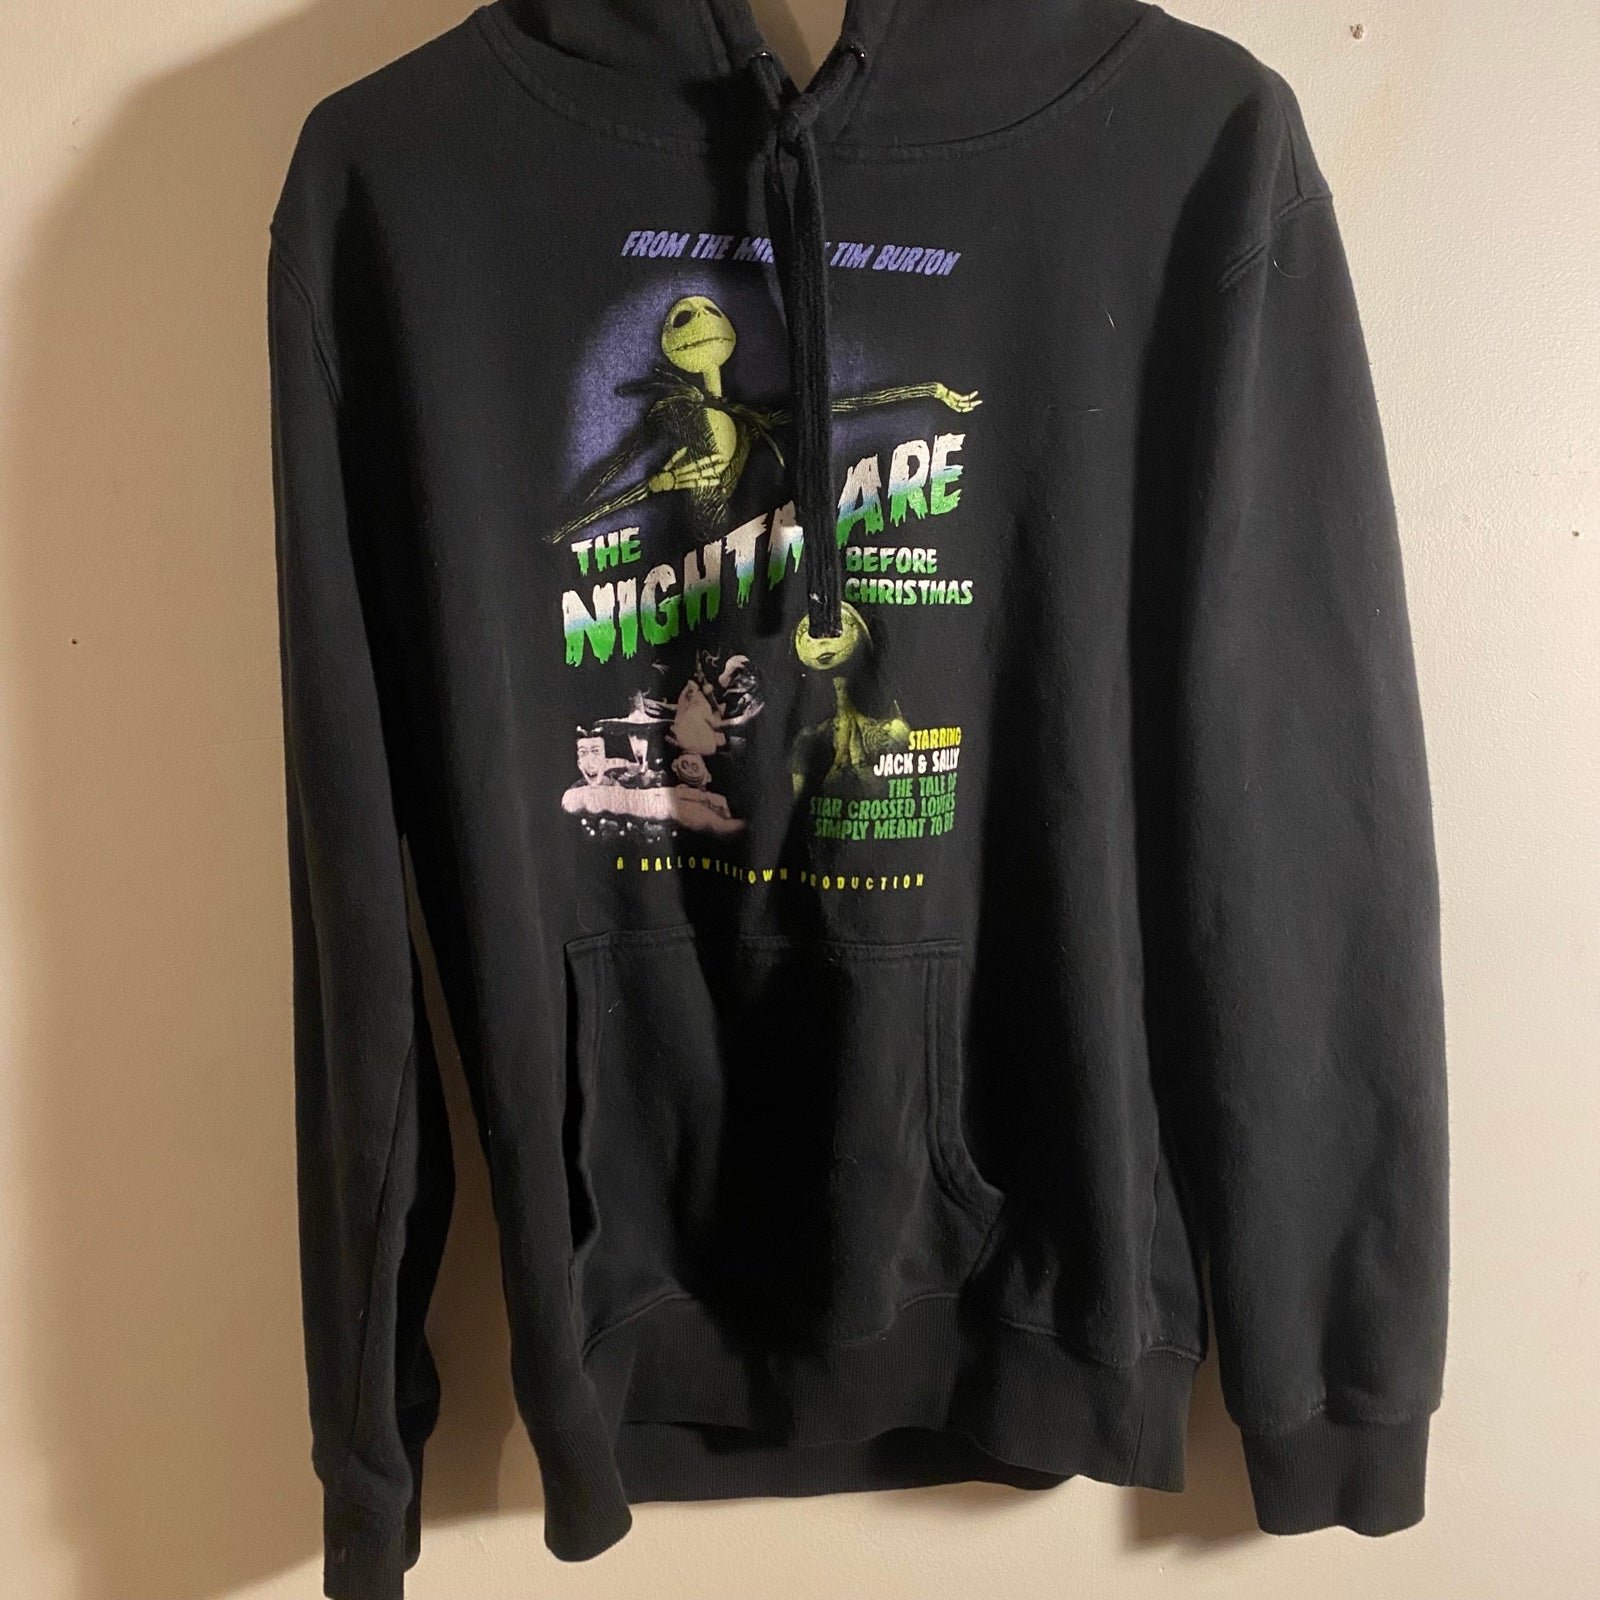 Wholesale price The Nightmare Before Christmas Hoodie Nlh4TJhzs Everyday Low Prices